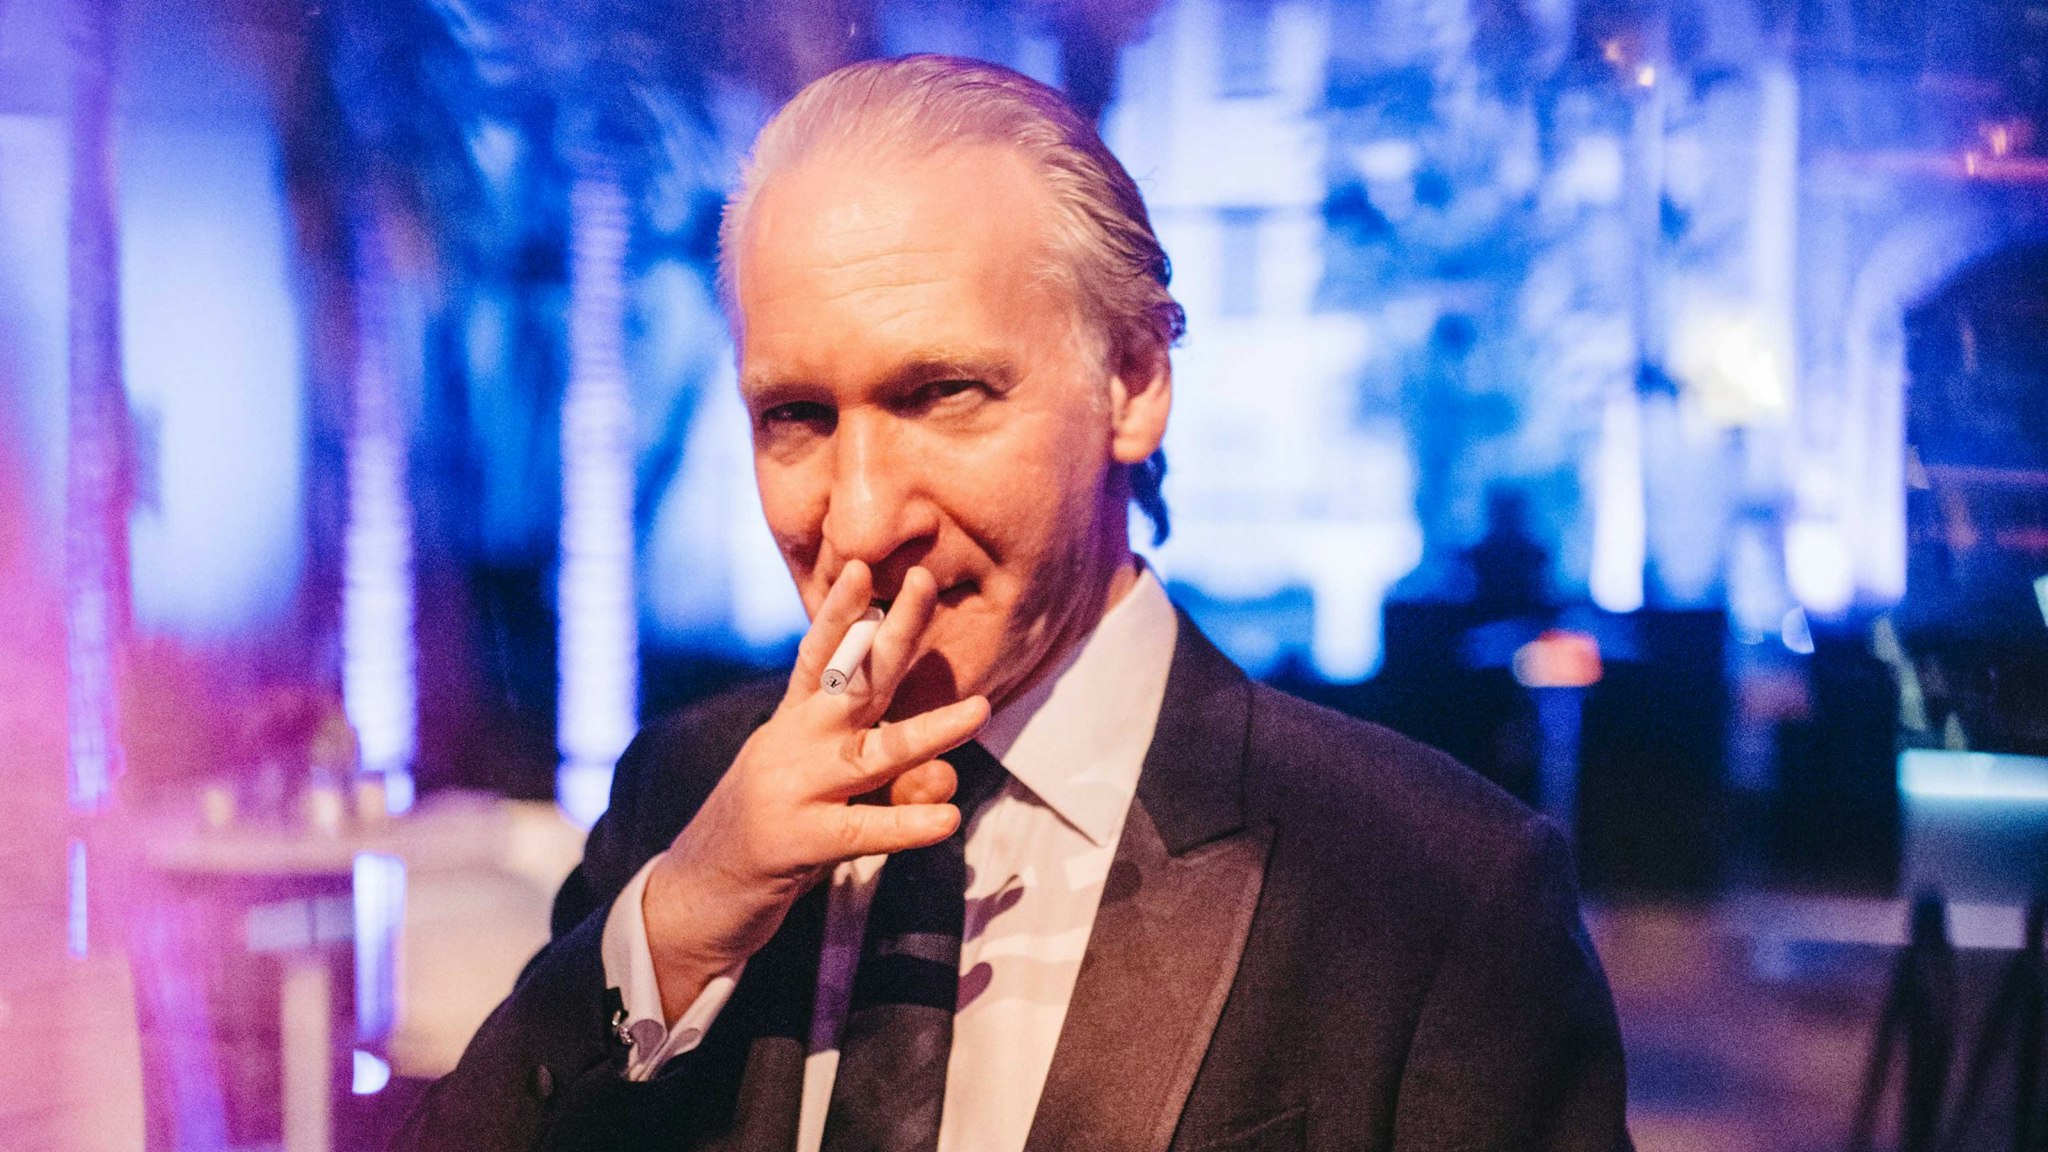 BEVERLY HILLS, CALIFORNIA - FEBRUARY 09: (EDITORS NOTE: Image has been created in camera using a reflective surface and edited using digital filters) Bill Maher attends the 2020 Vanity Fair Oscar Party Hosted By Radhika Jones at Wallis Annenberg Center for the Performing Arts on February 09, 2020 in Beverly Hills, California.